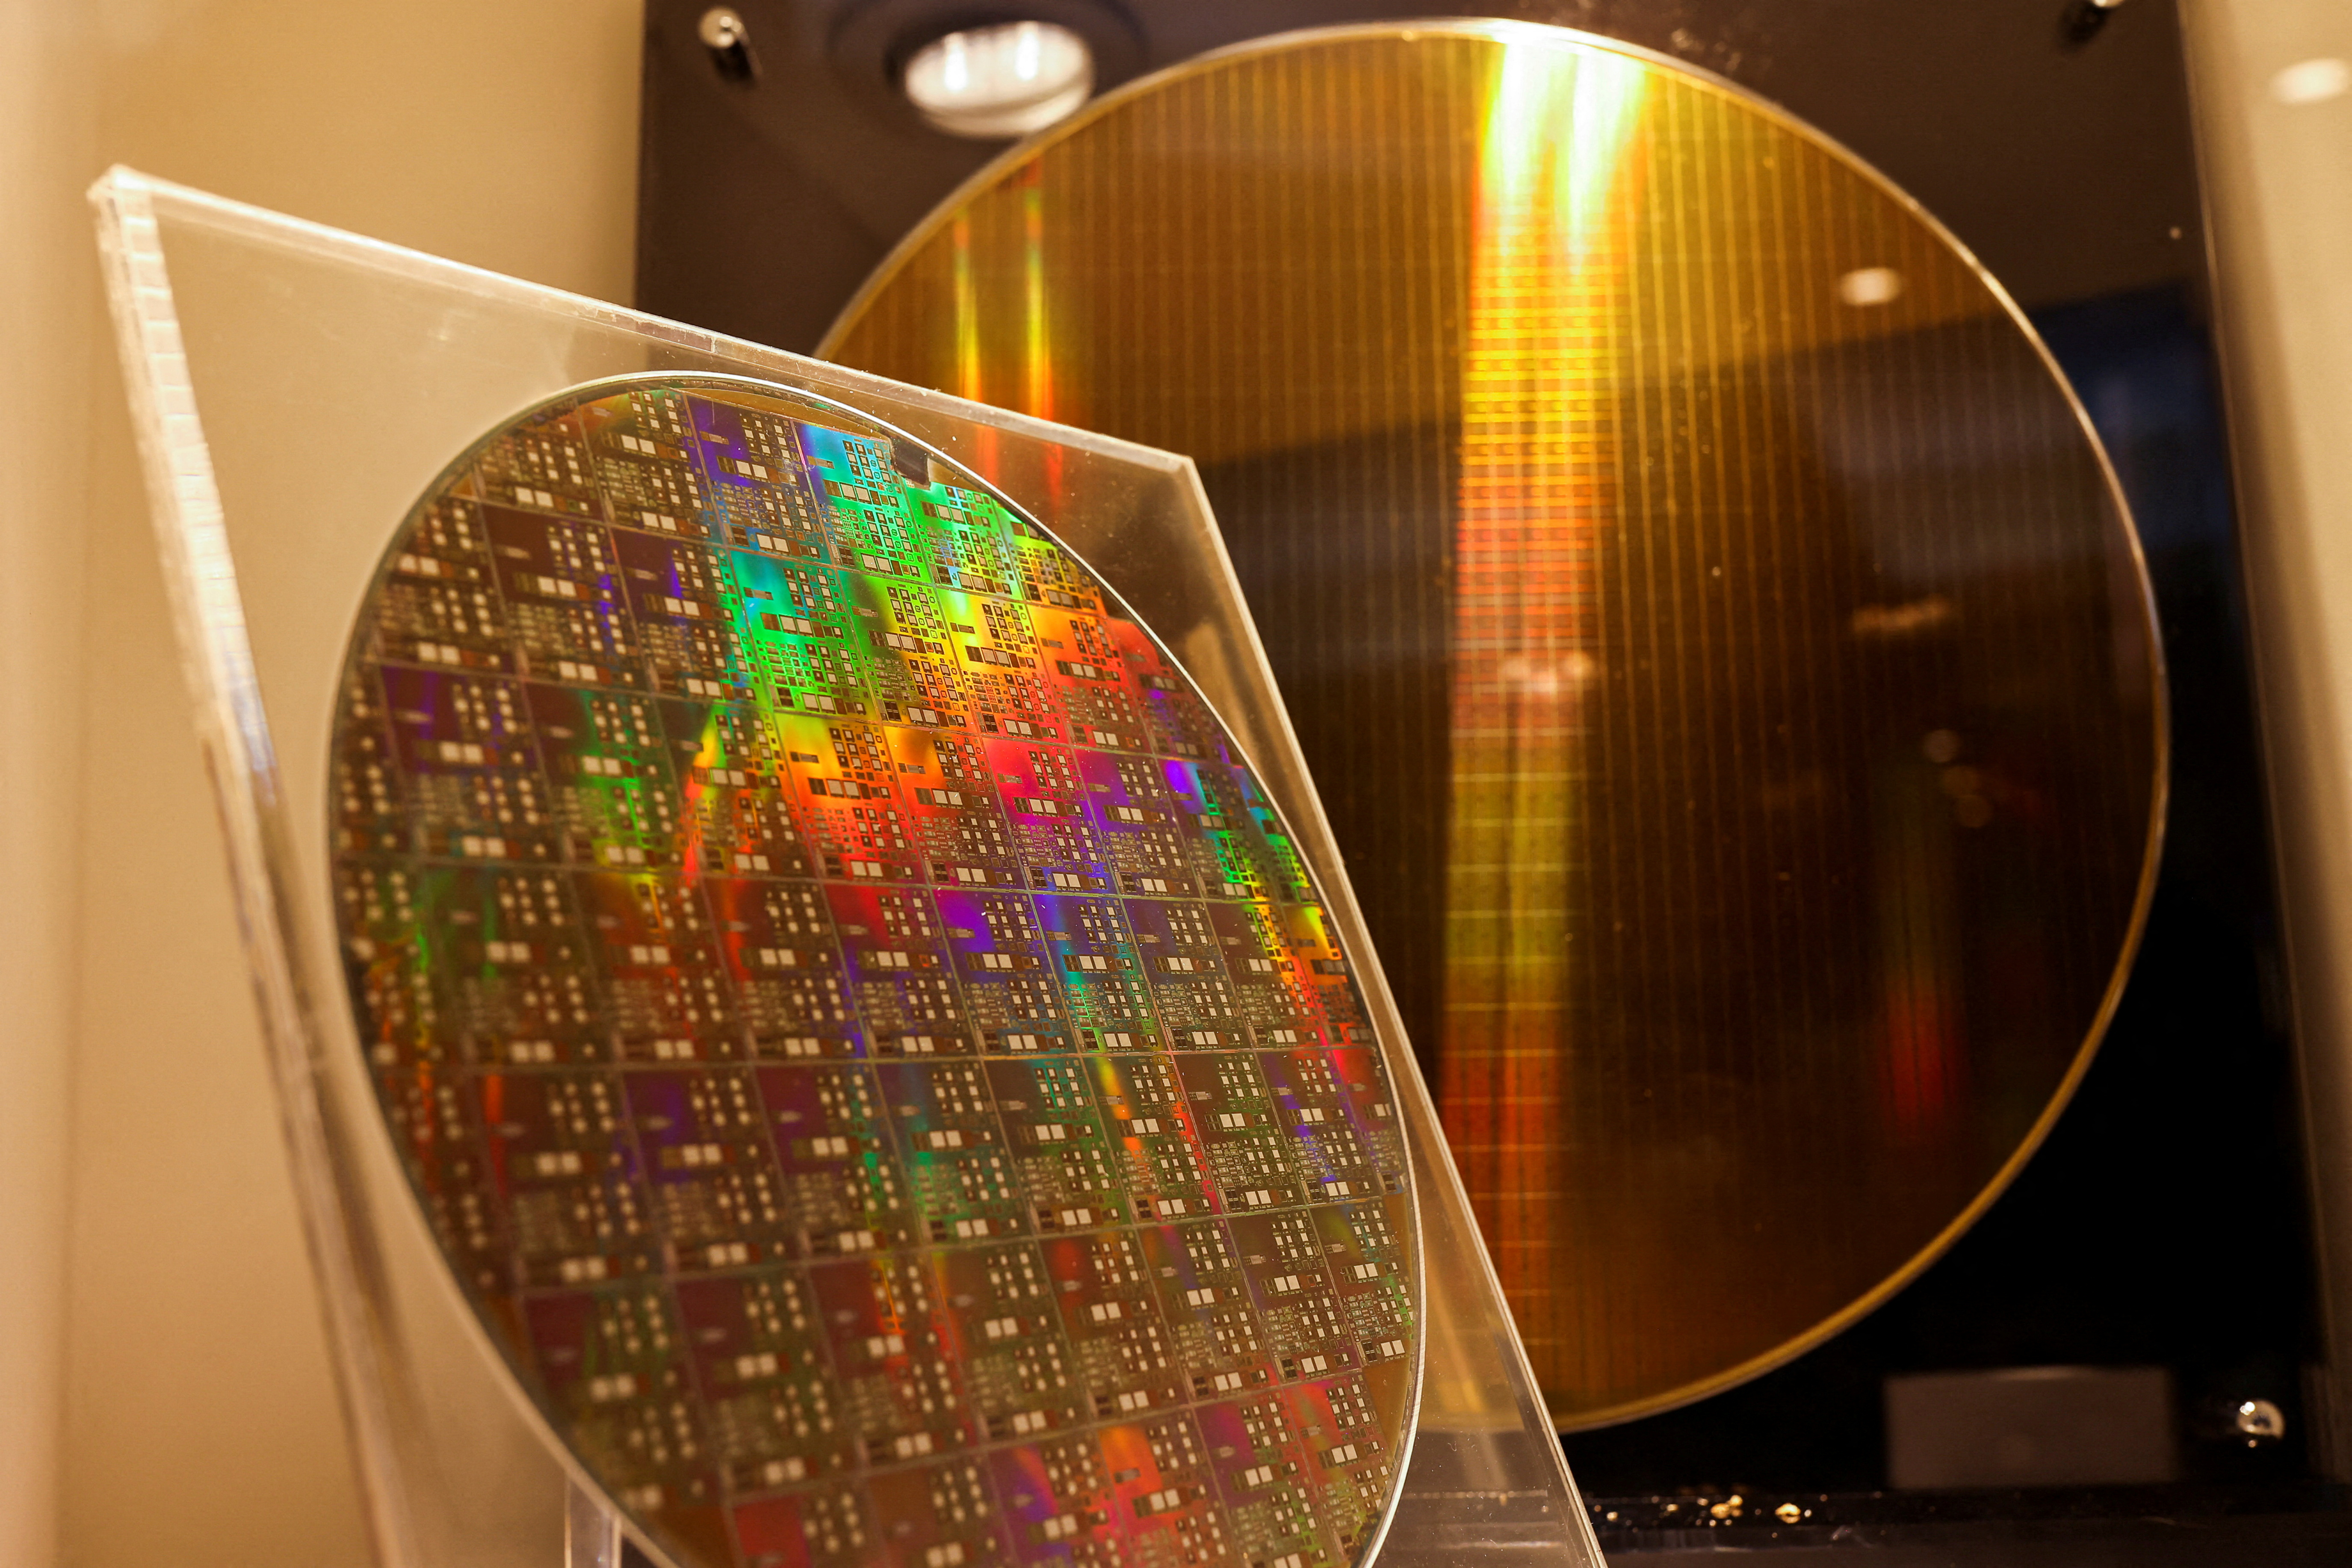 Two chips are on display at the Taiwan Semiconductor Research Institute (TSRI) in Hsinchu